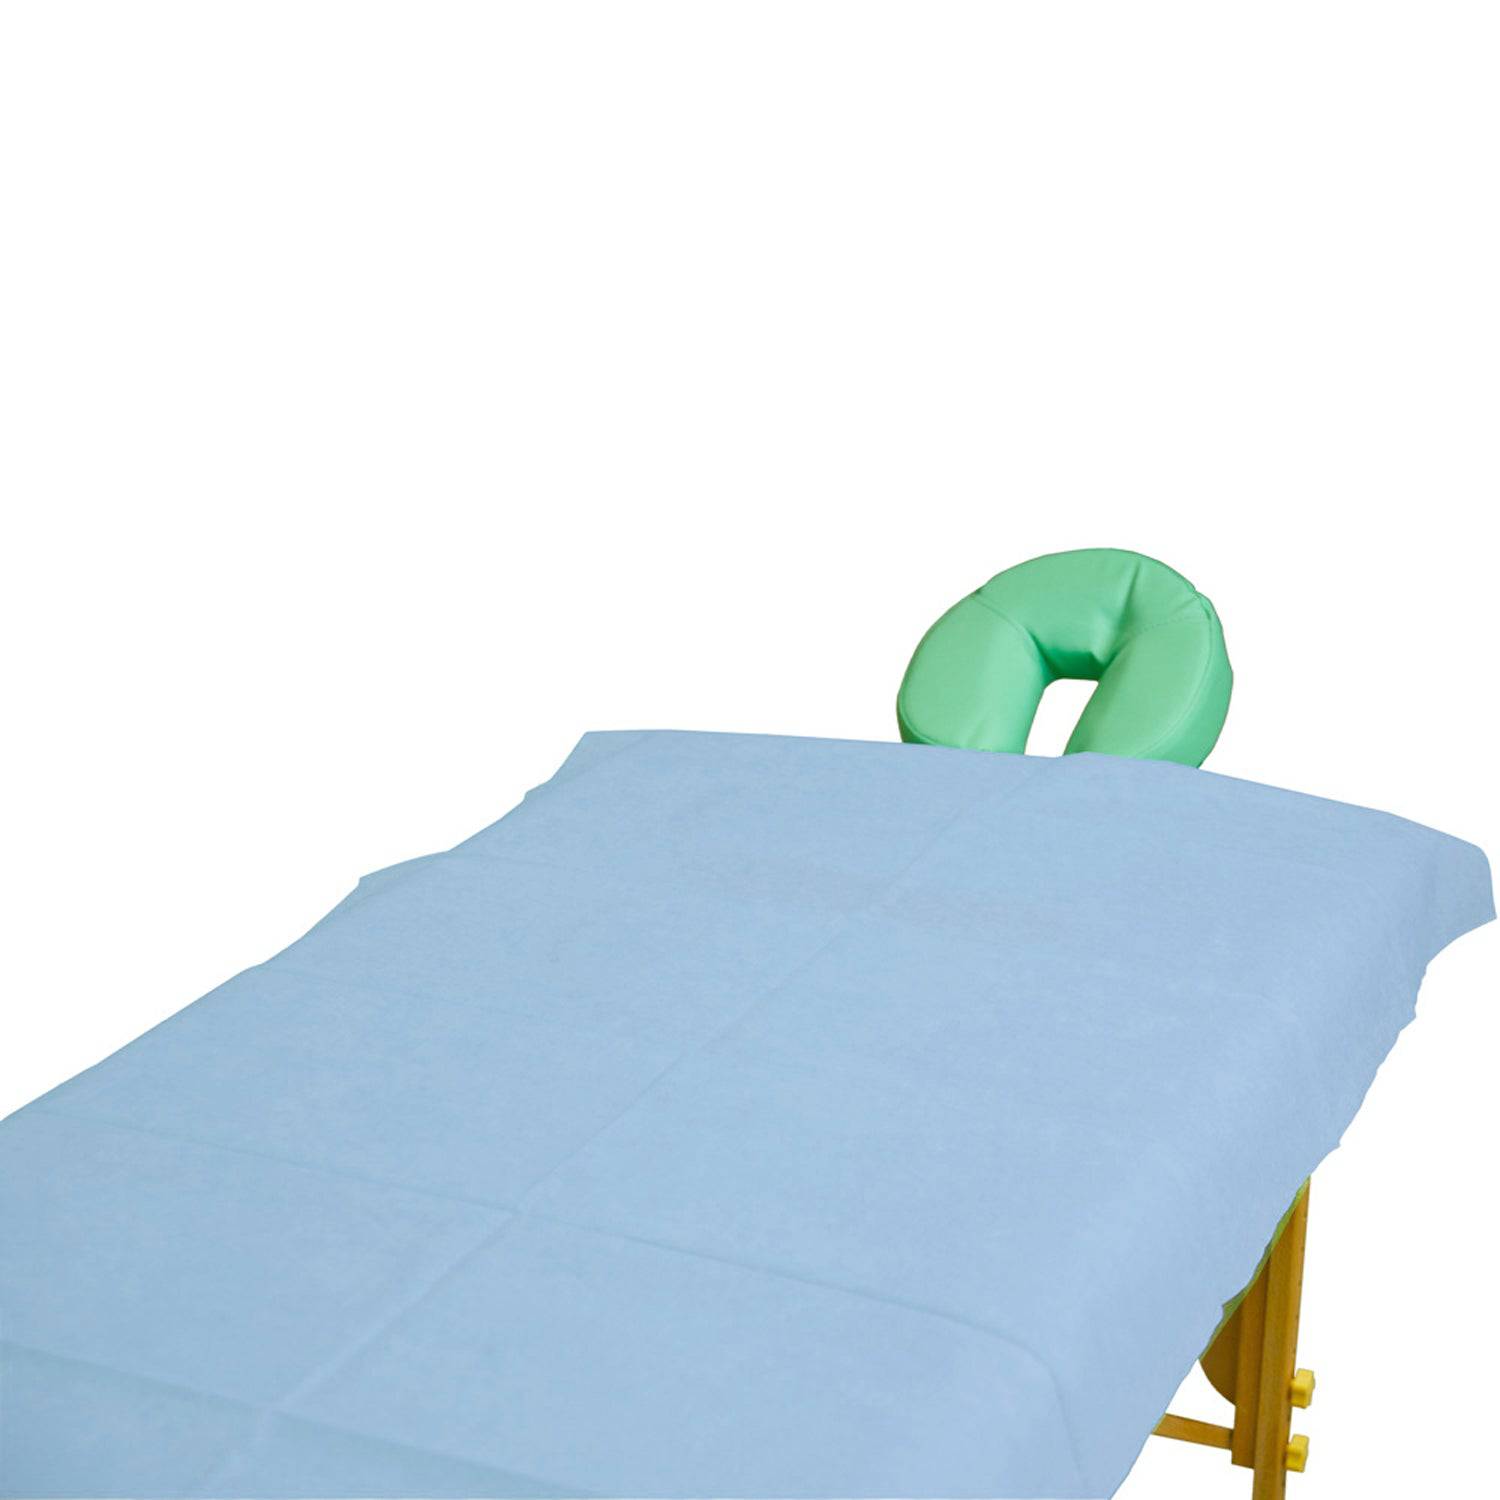 Disposable Sheets for Exam Tables - Light Blue (100)